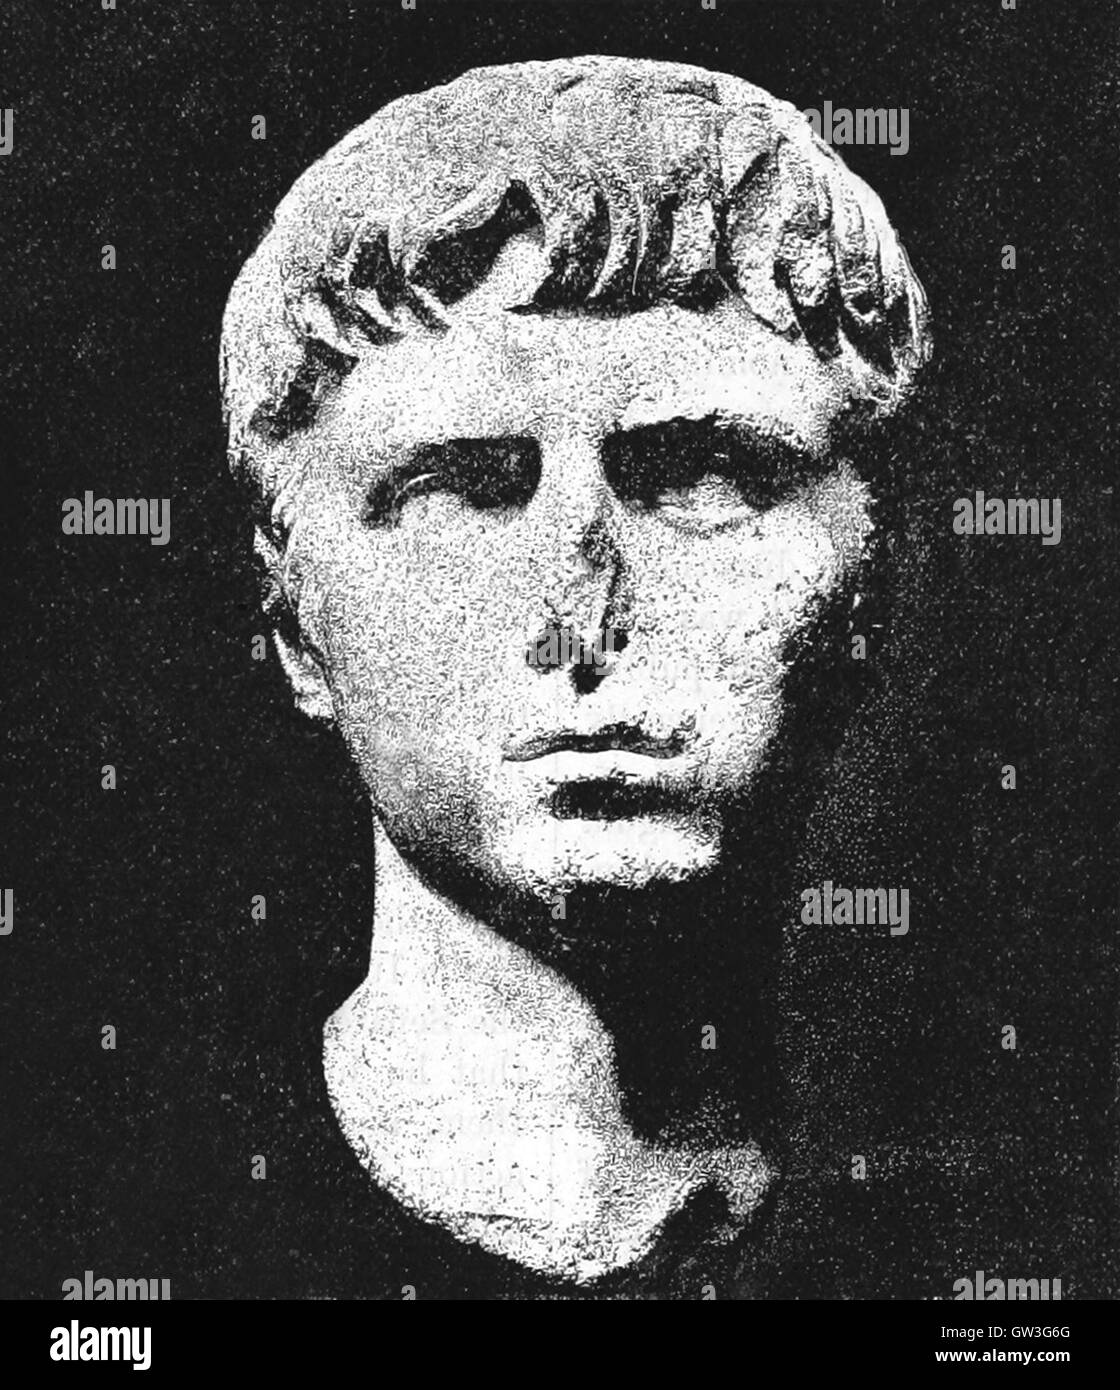 Bust of the Roman emperor Caligula.  Caligula was the popular nickname of Gaius Julius Caesar Augustus Germanicus, Roman emperor. Born Gaius Julius Caesar Germanicus, Caligula was a member of the house of rulers conventionally known as the Julio-Claudian dynasty.  Image sourced from Cassell's Illustrated Universal History (1893). Stock Photo